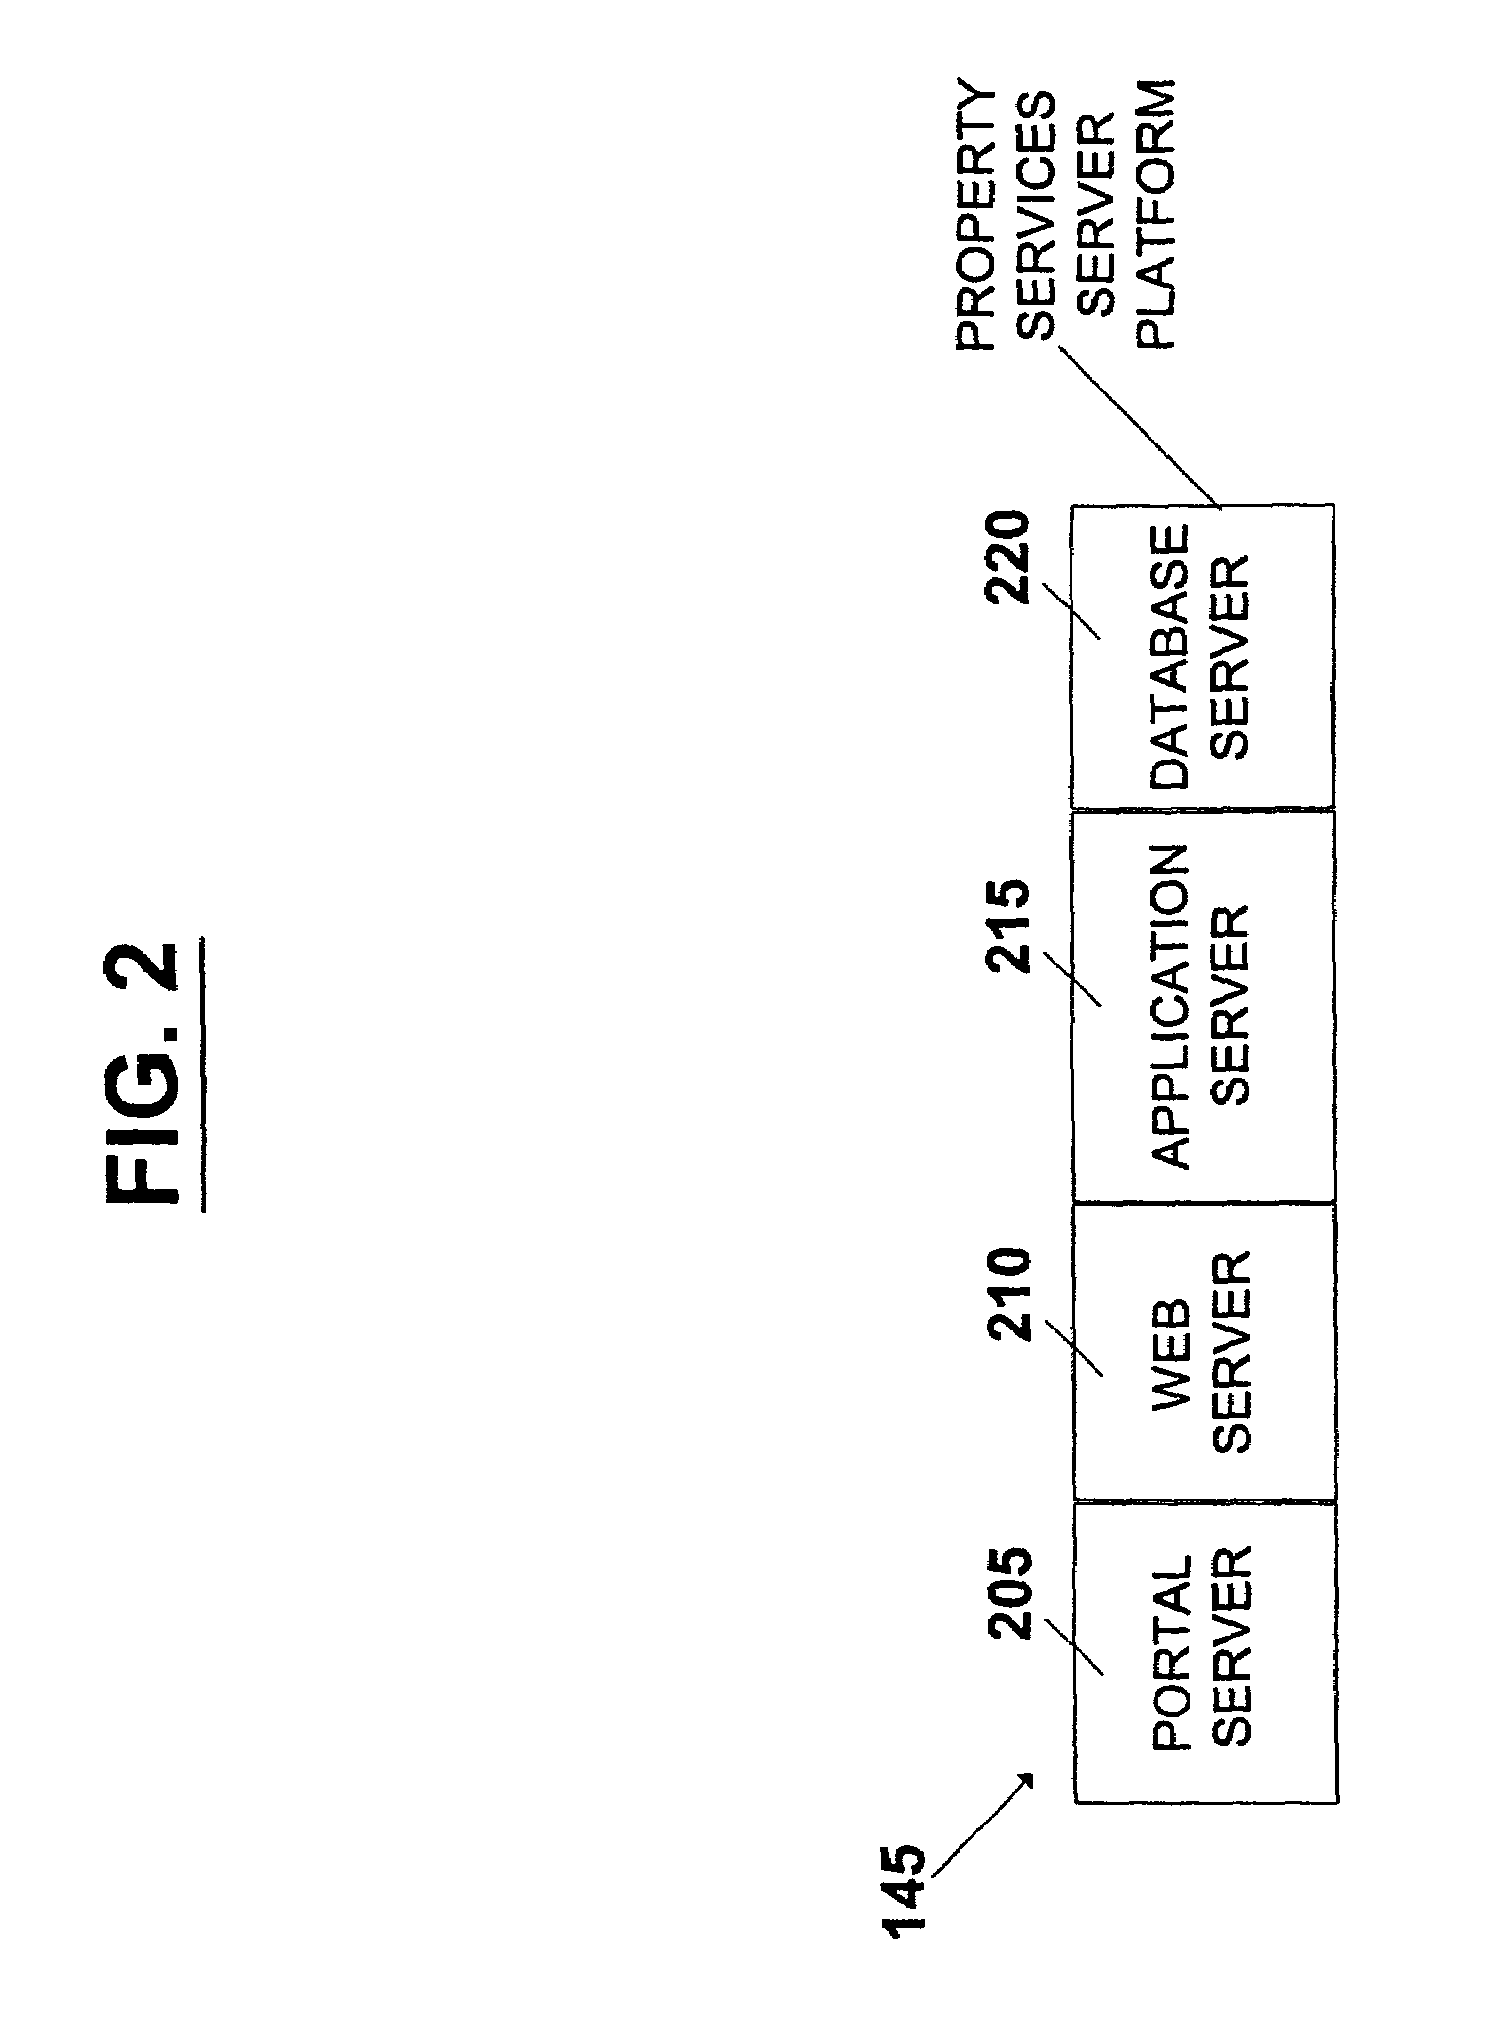 Method and system for property valuation in an on-line computing environment